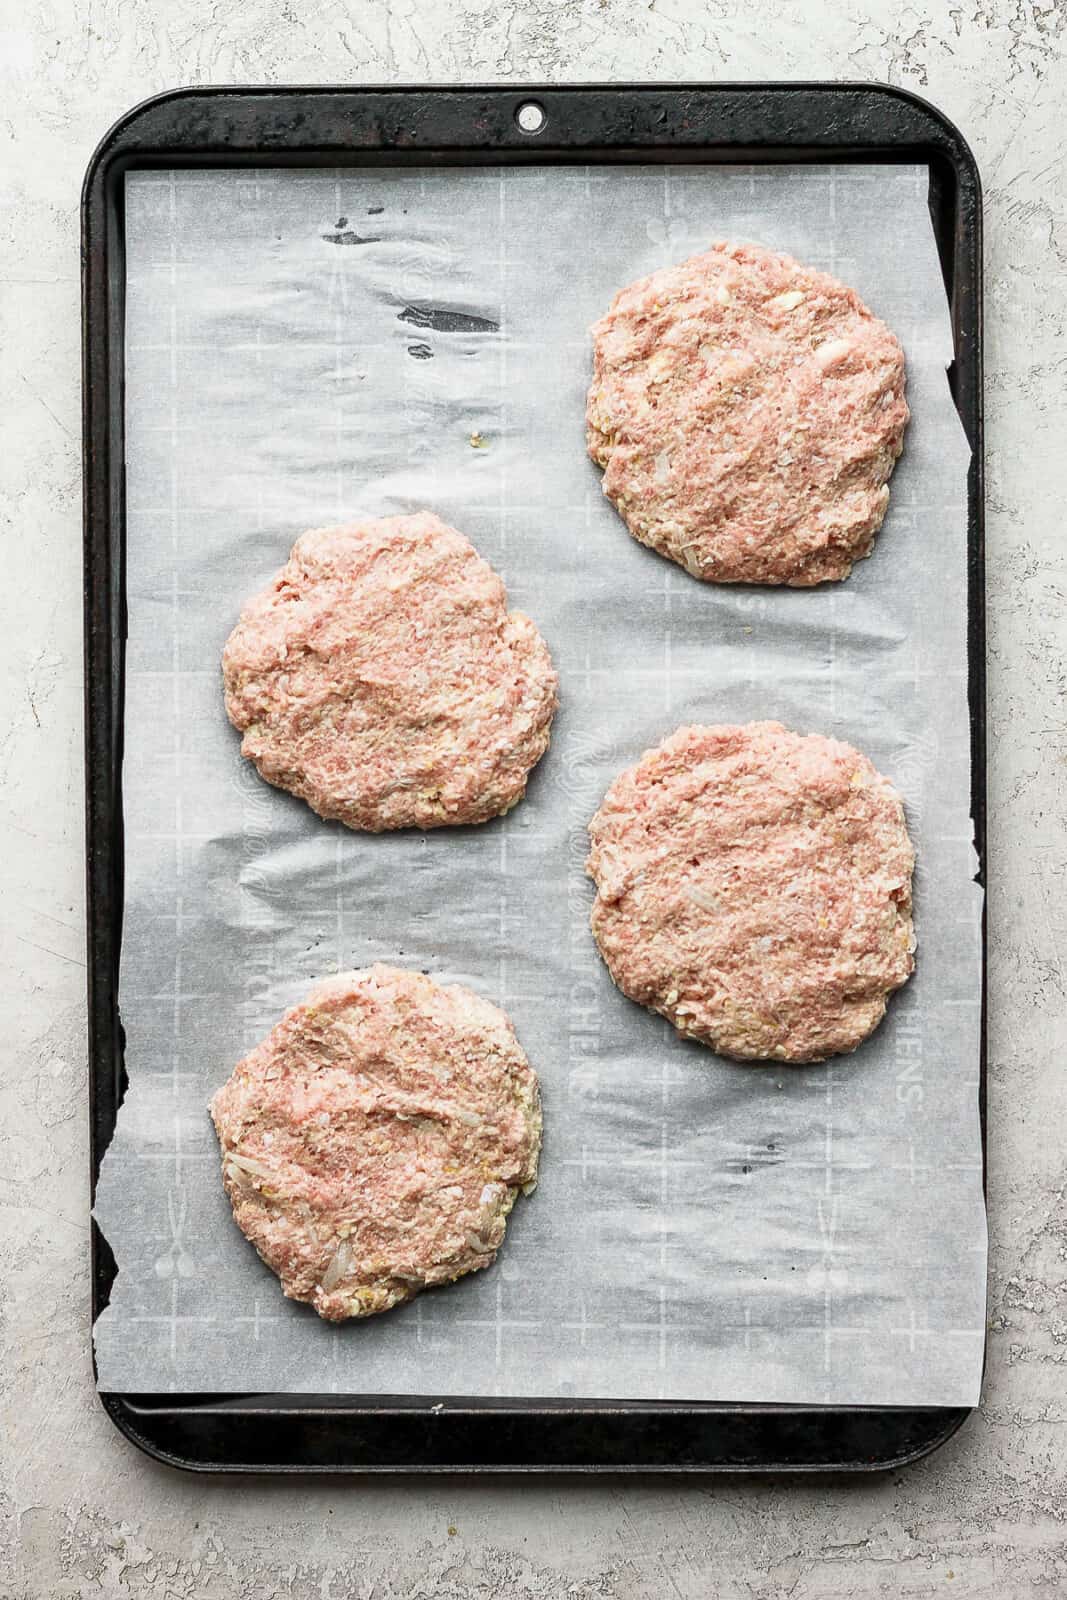 Turkey patties on a parchment-lined baking sheet.